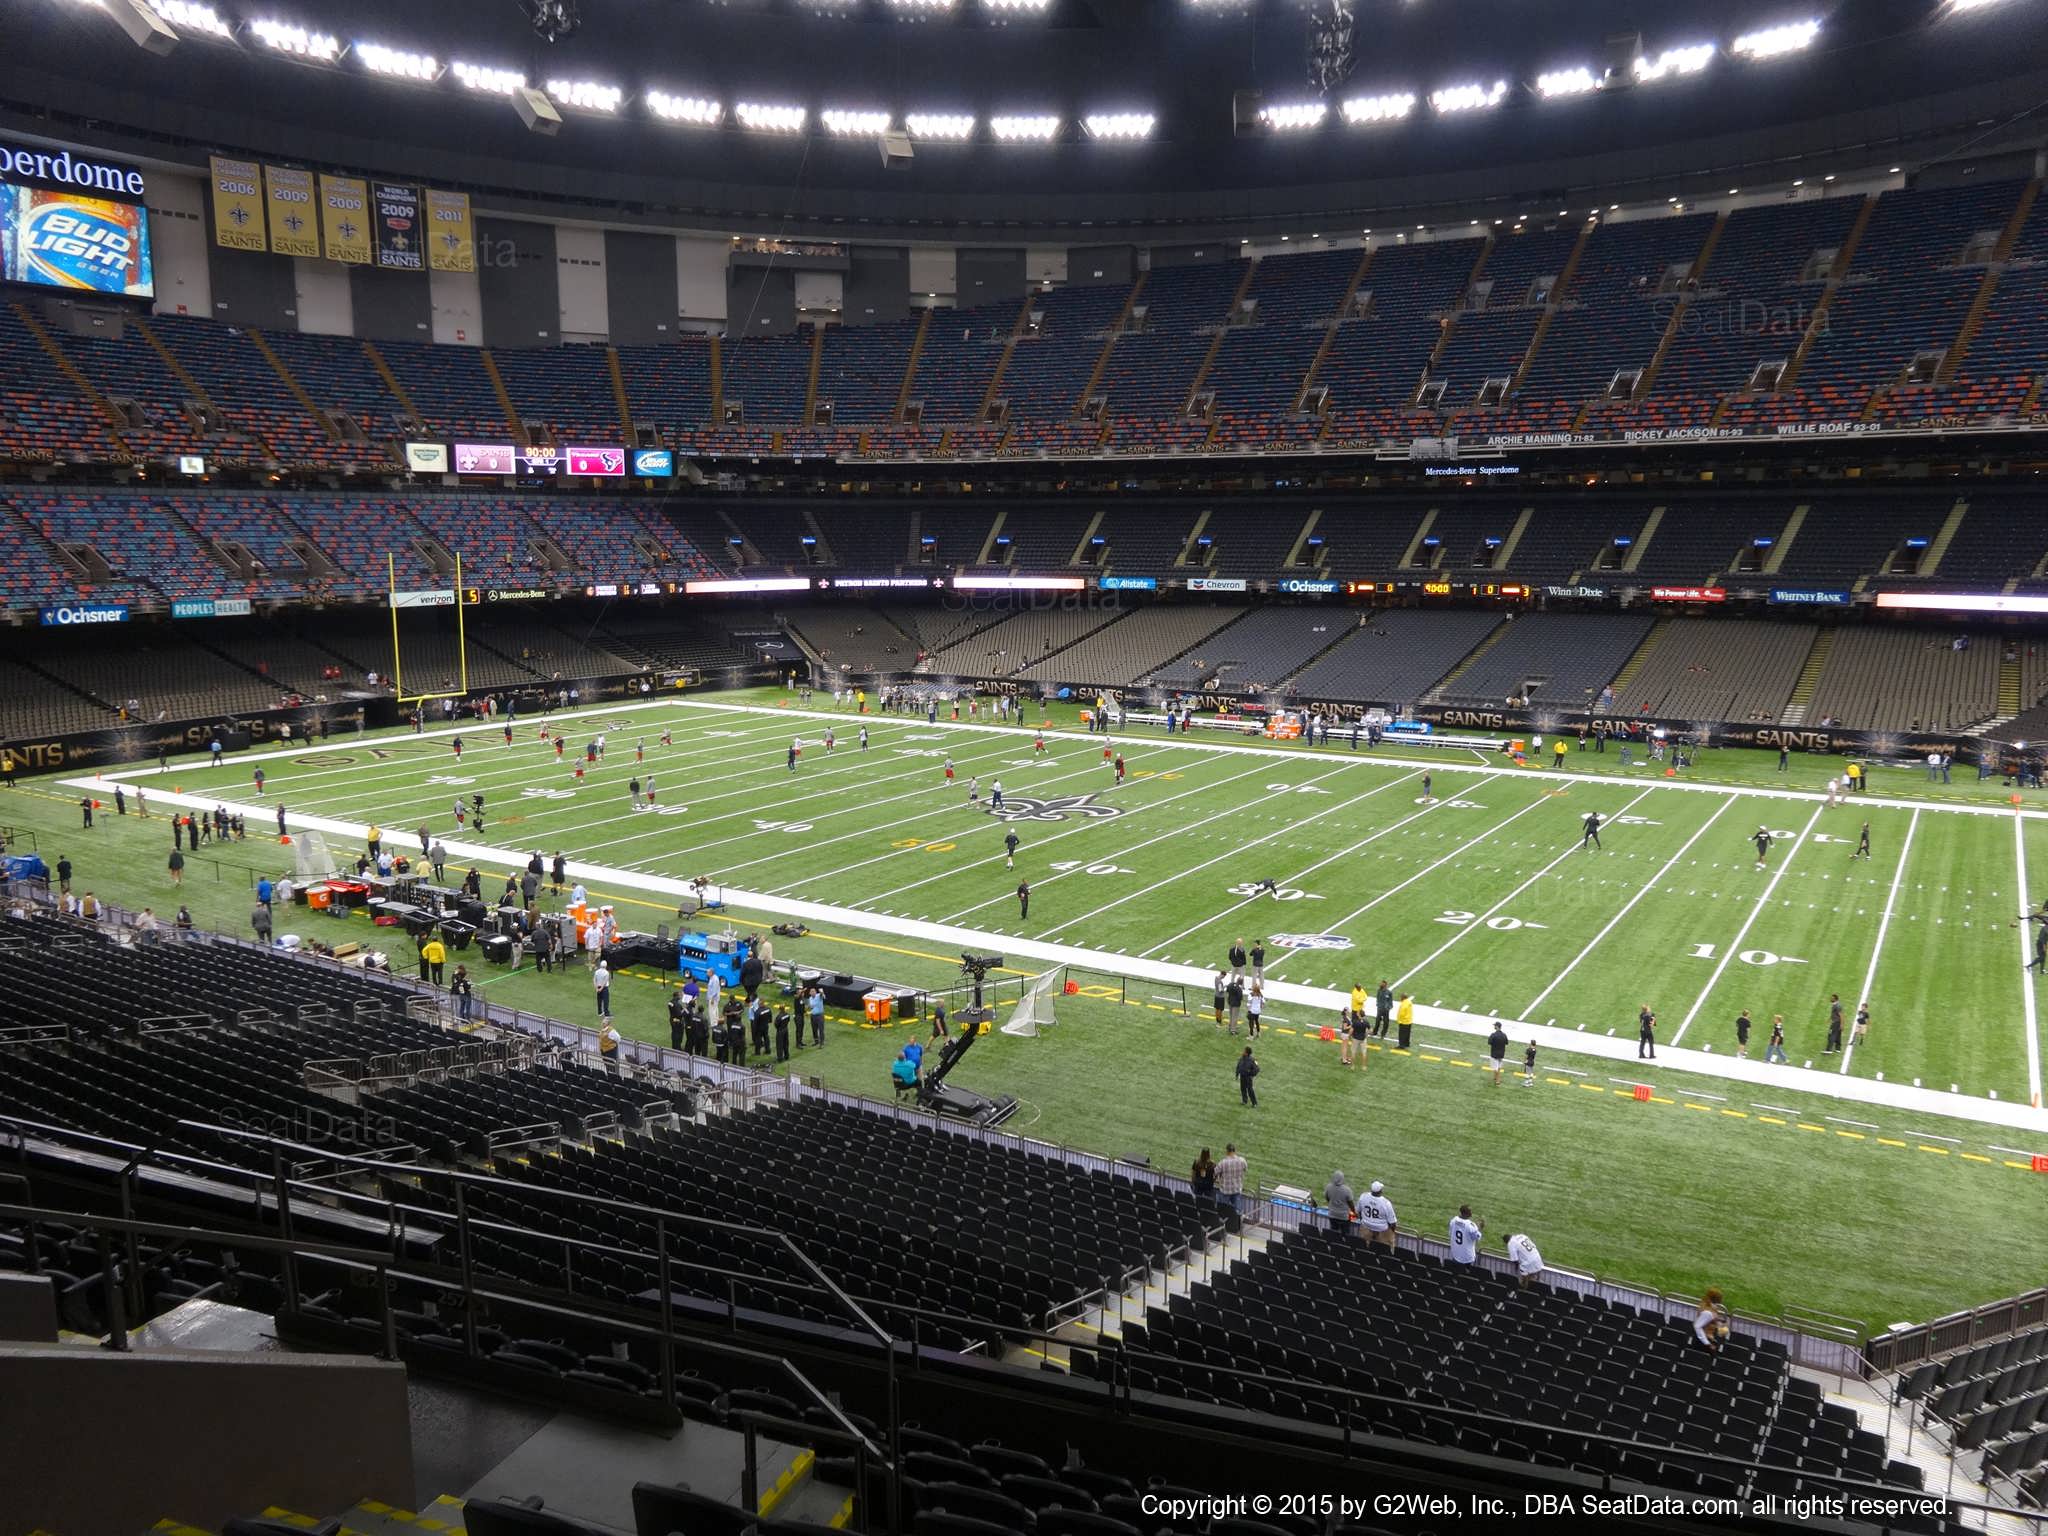 Seat view from section 332 at the Mercedes-Benz Superdome, home of the New Orleans Saints